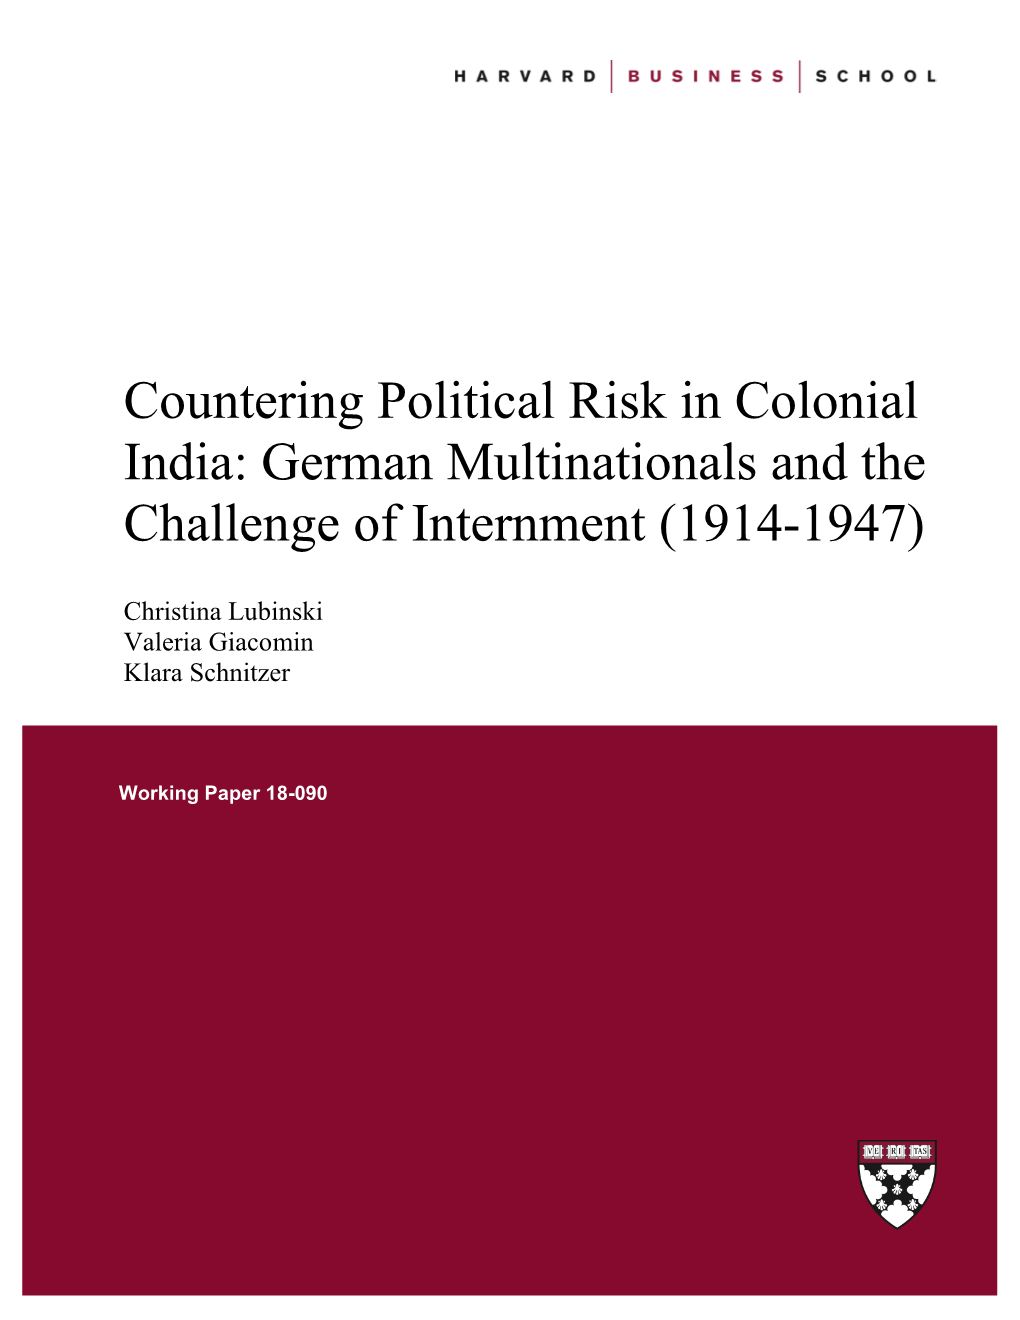 Countering Political Risk in Colonial India: German Multinationals and the Challenge of Internment (1914-1947)